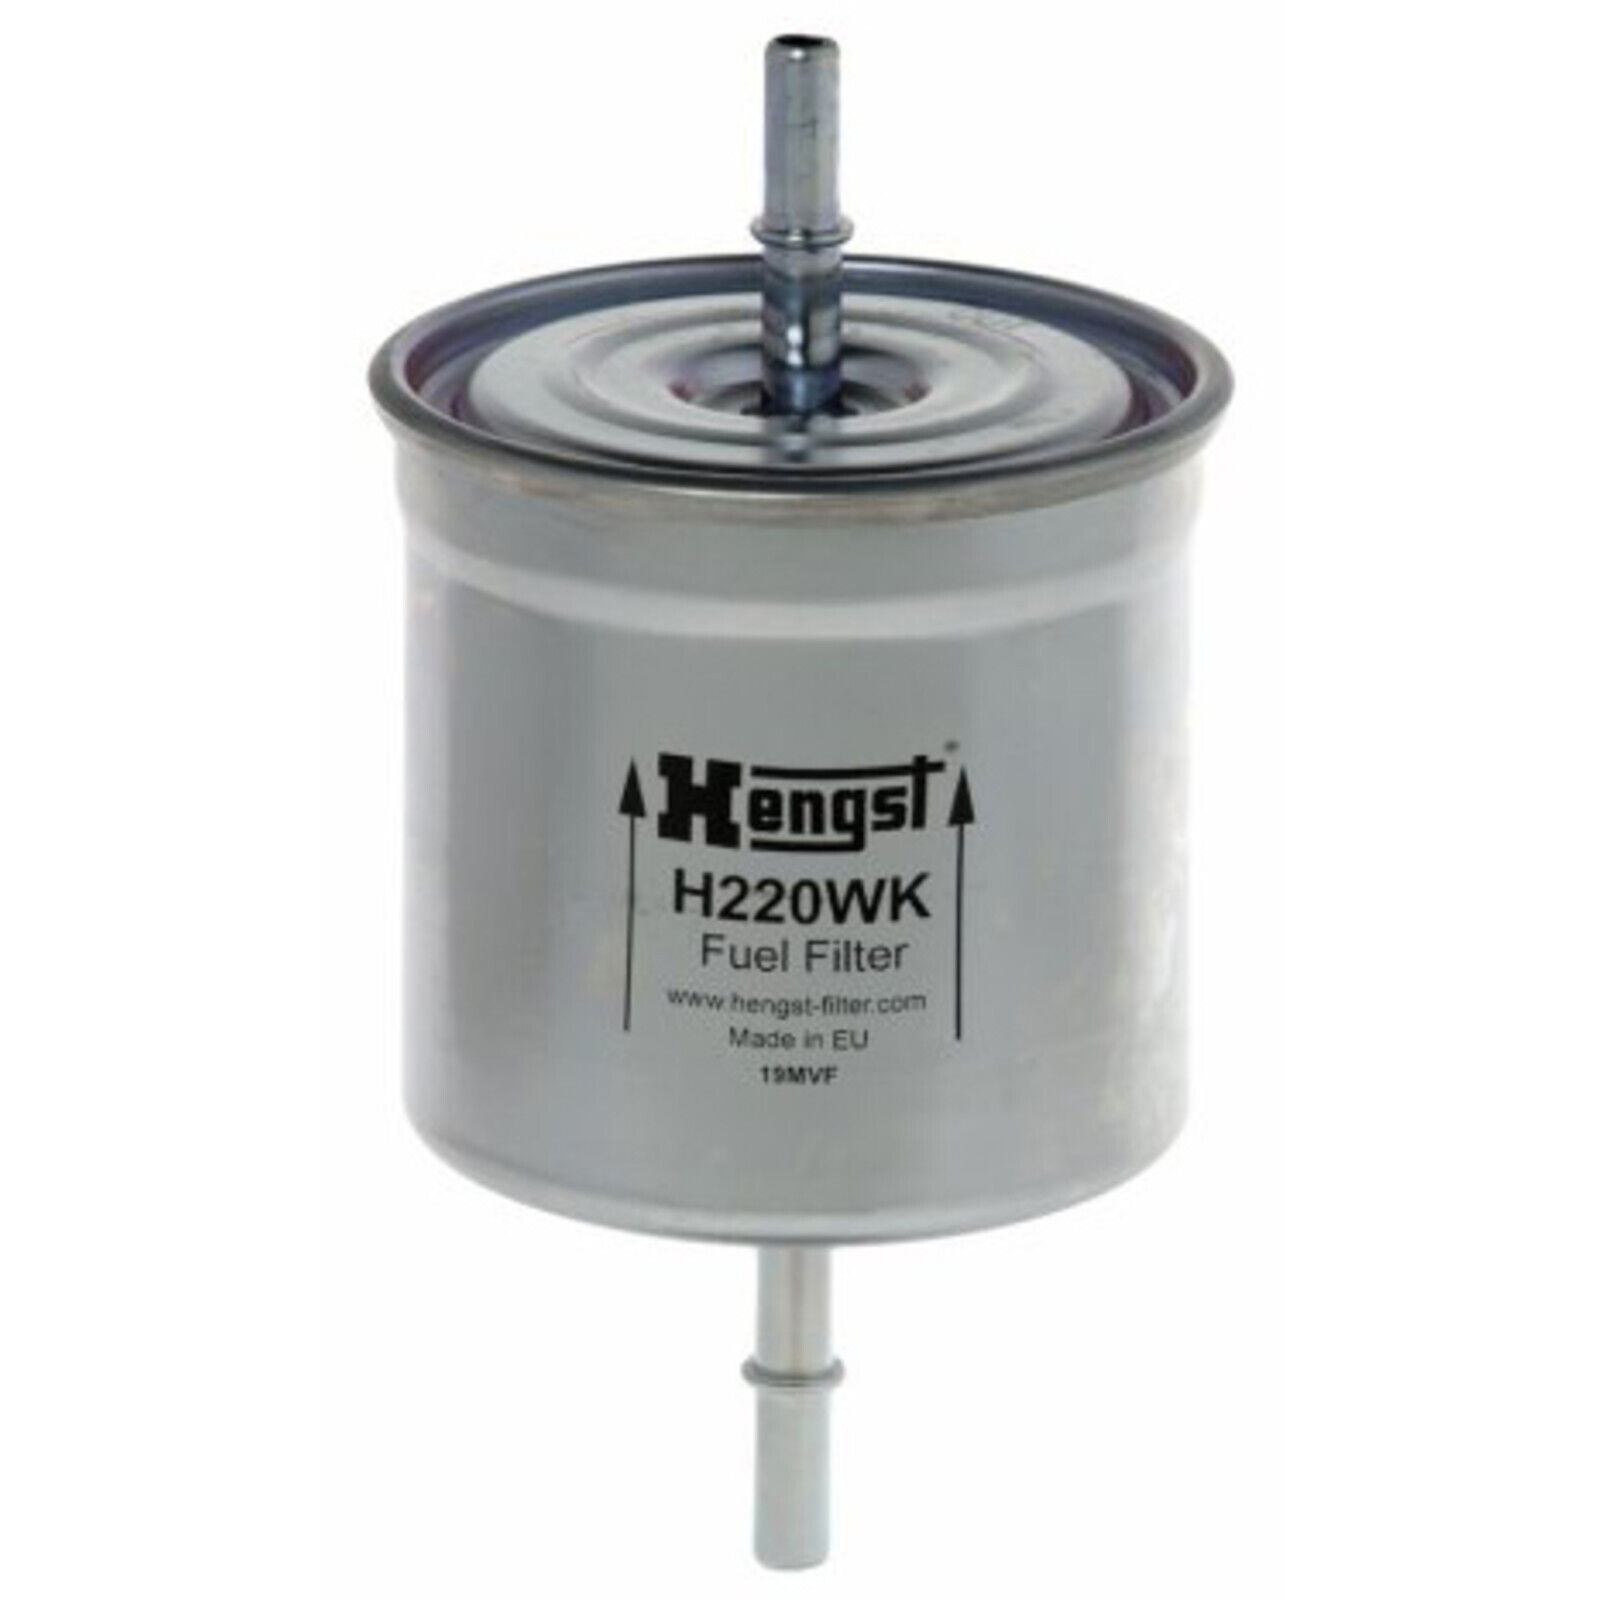 H220WK Hengst New Fuel Filter Gas for Volvo V70 S40 S80 S60 XC90 XC70 C70 V40